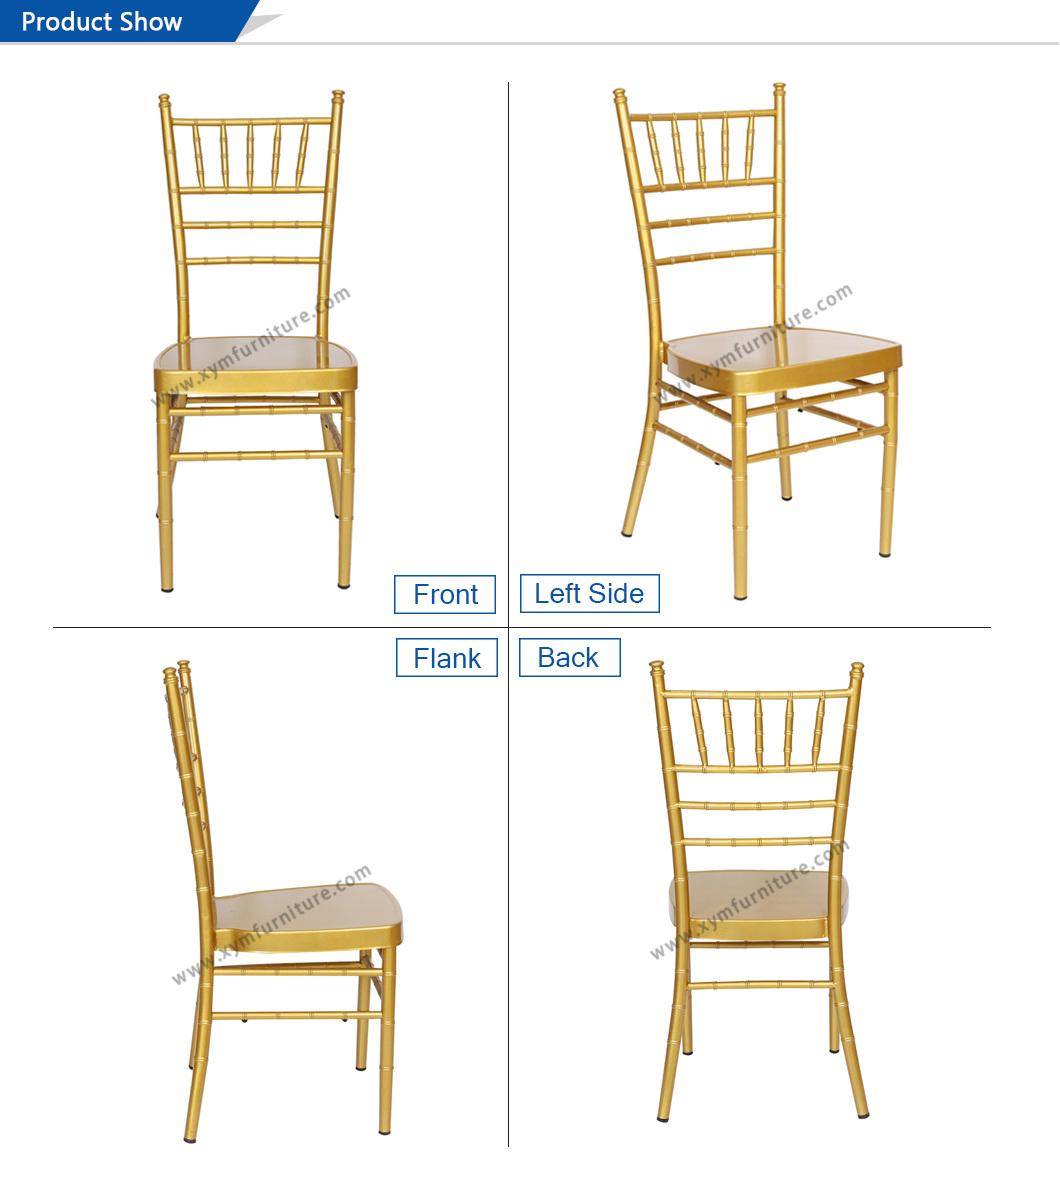 Cheap Outdoor Rental Chiavari Chair for Promotion